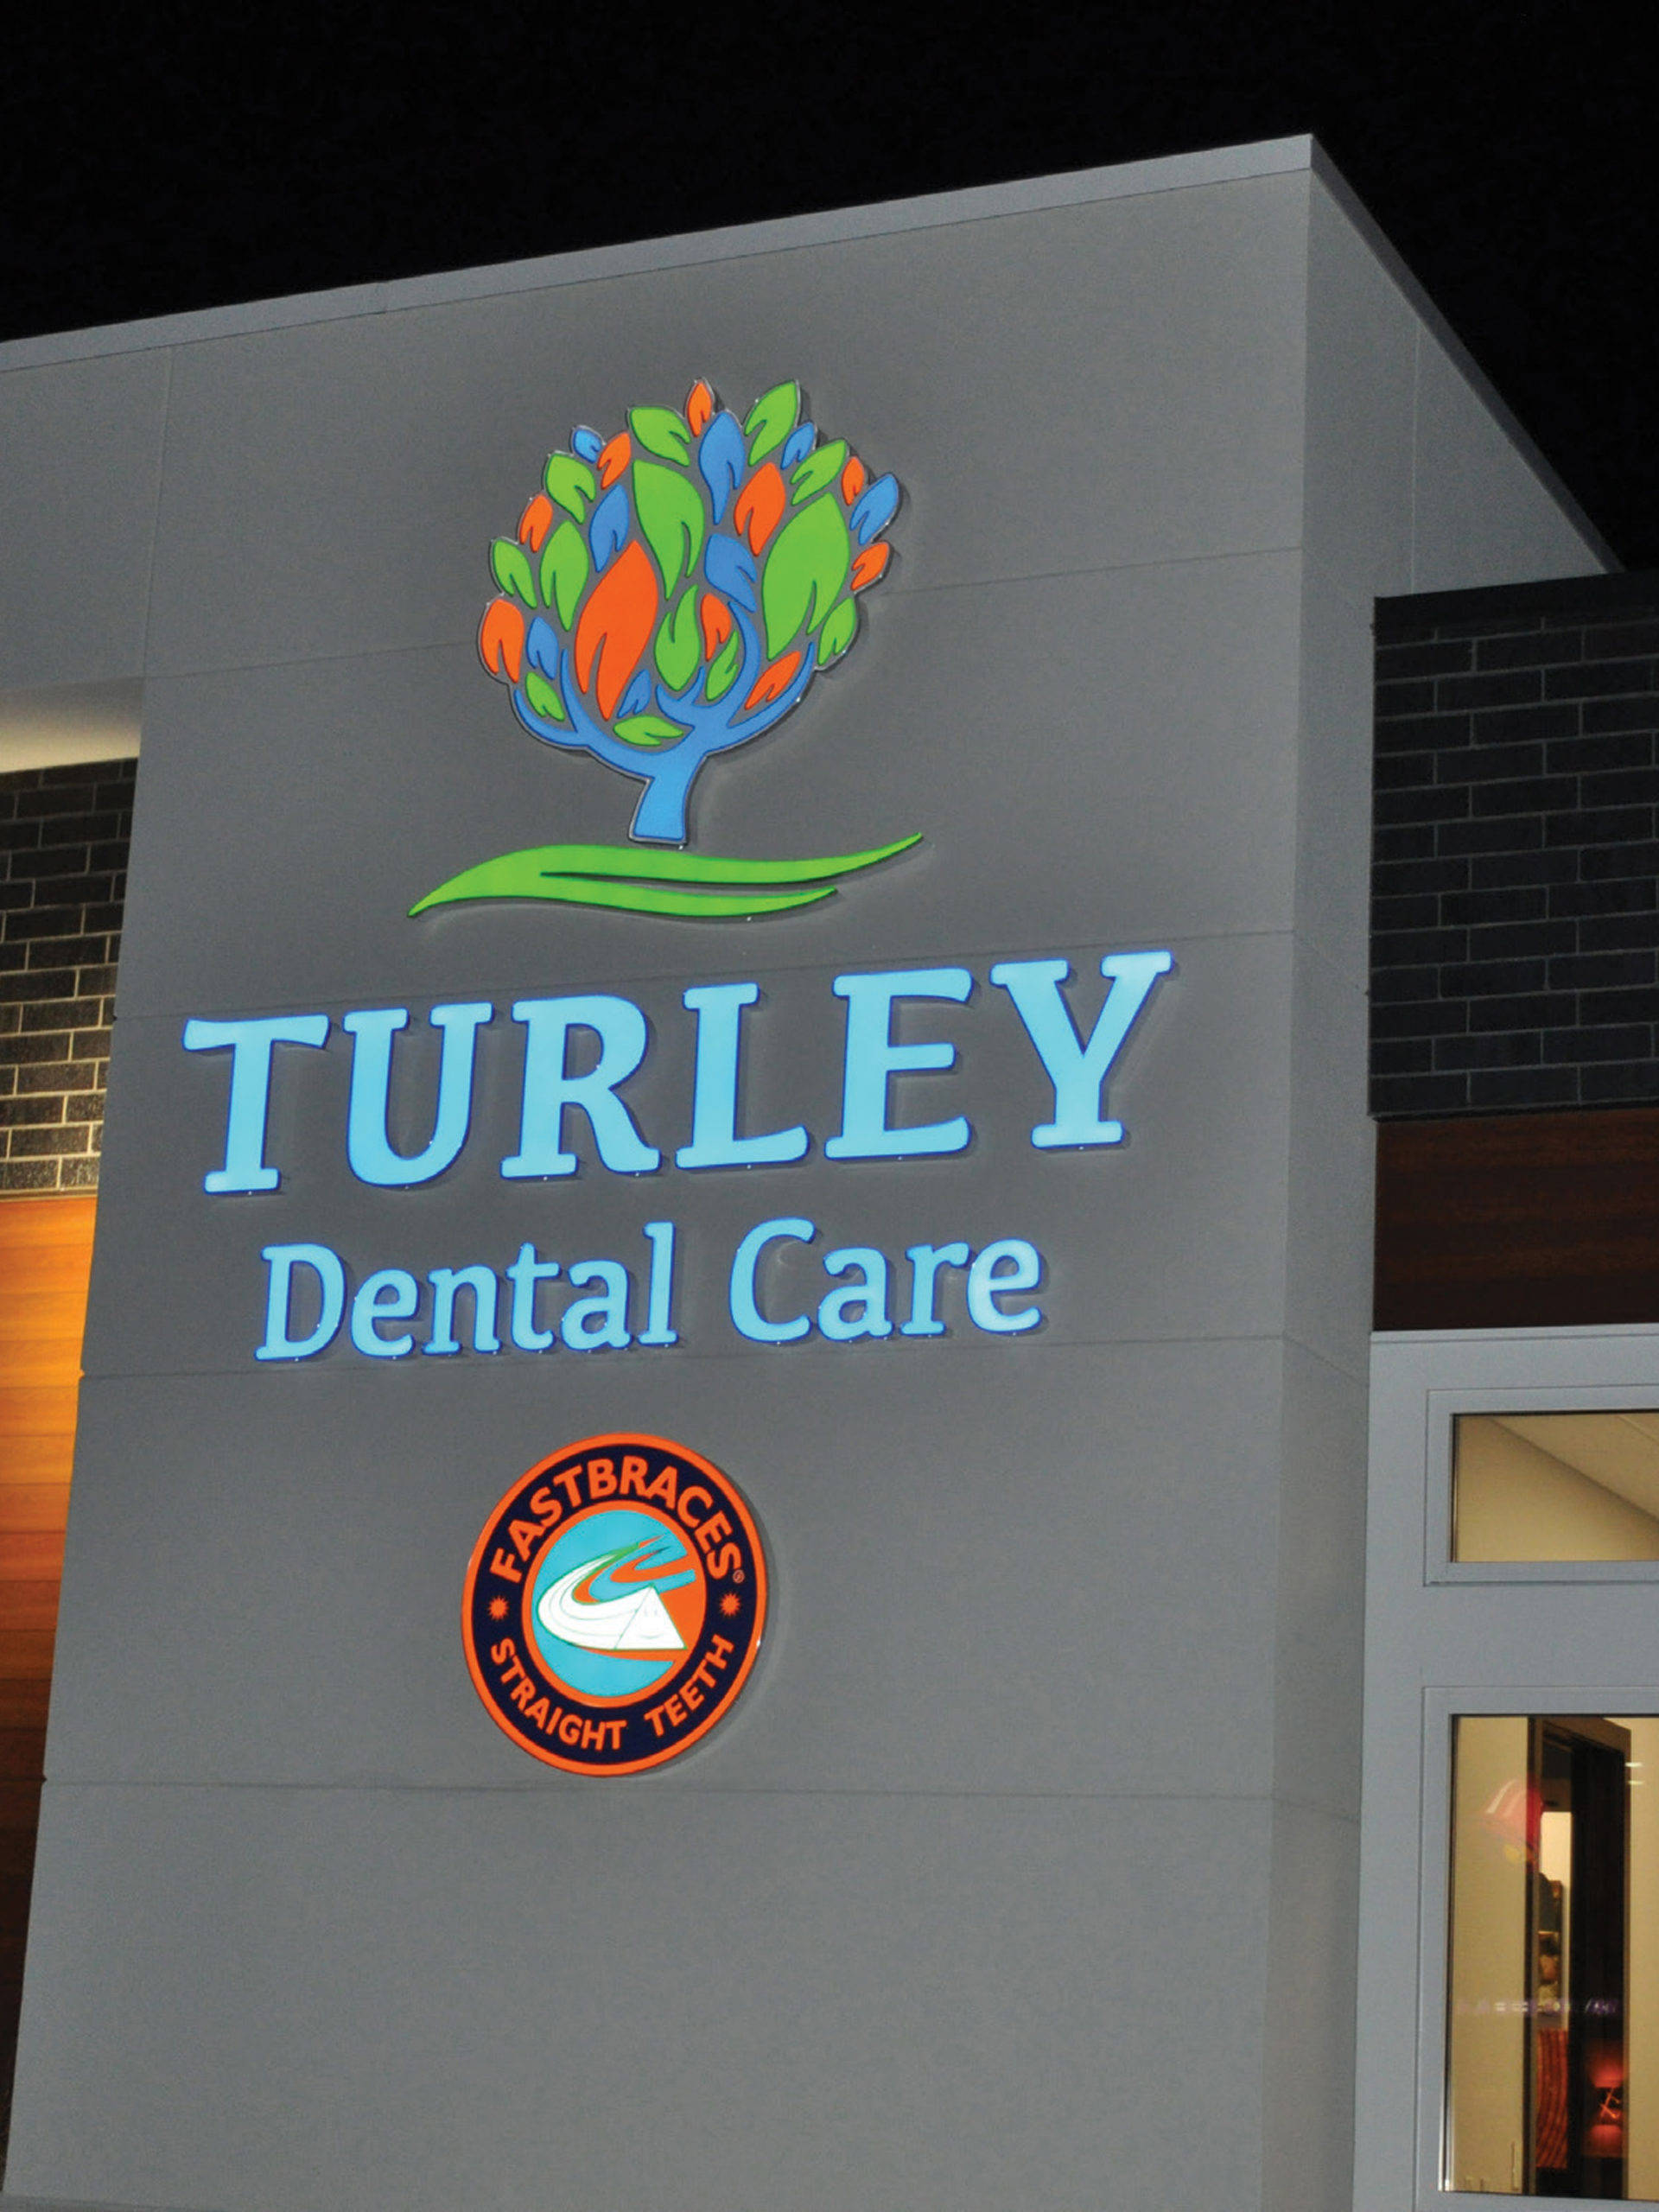 Turley Dental Care Sign